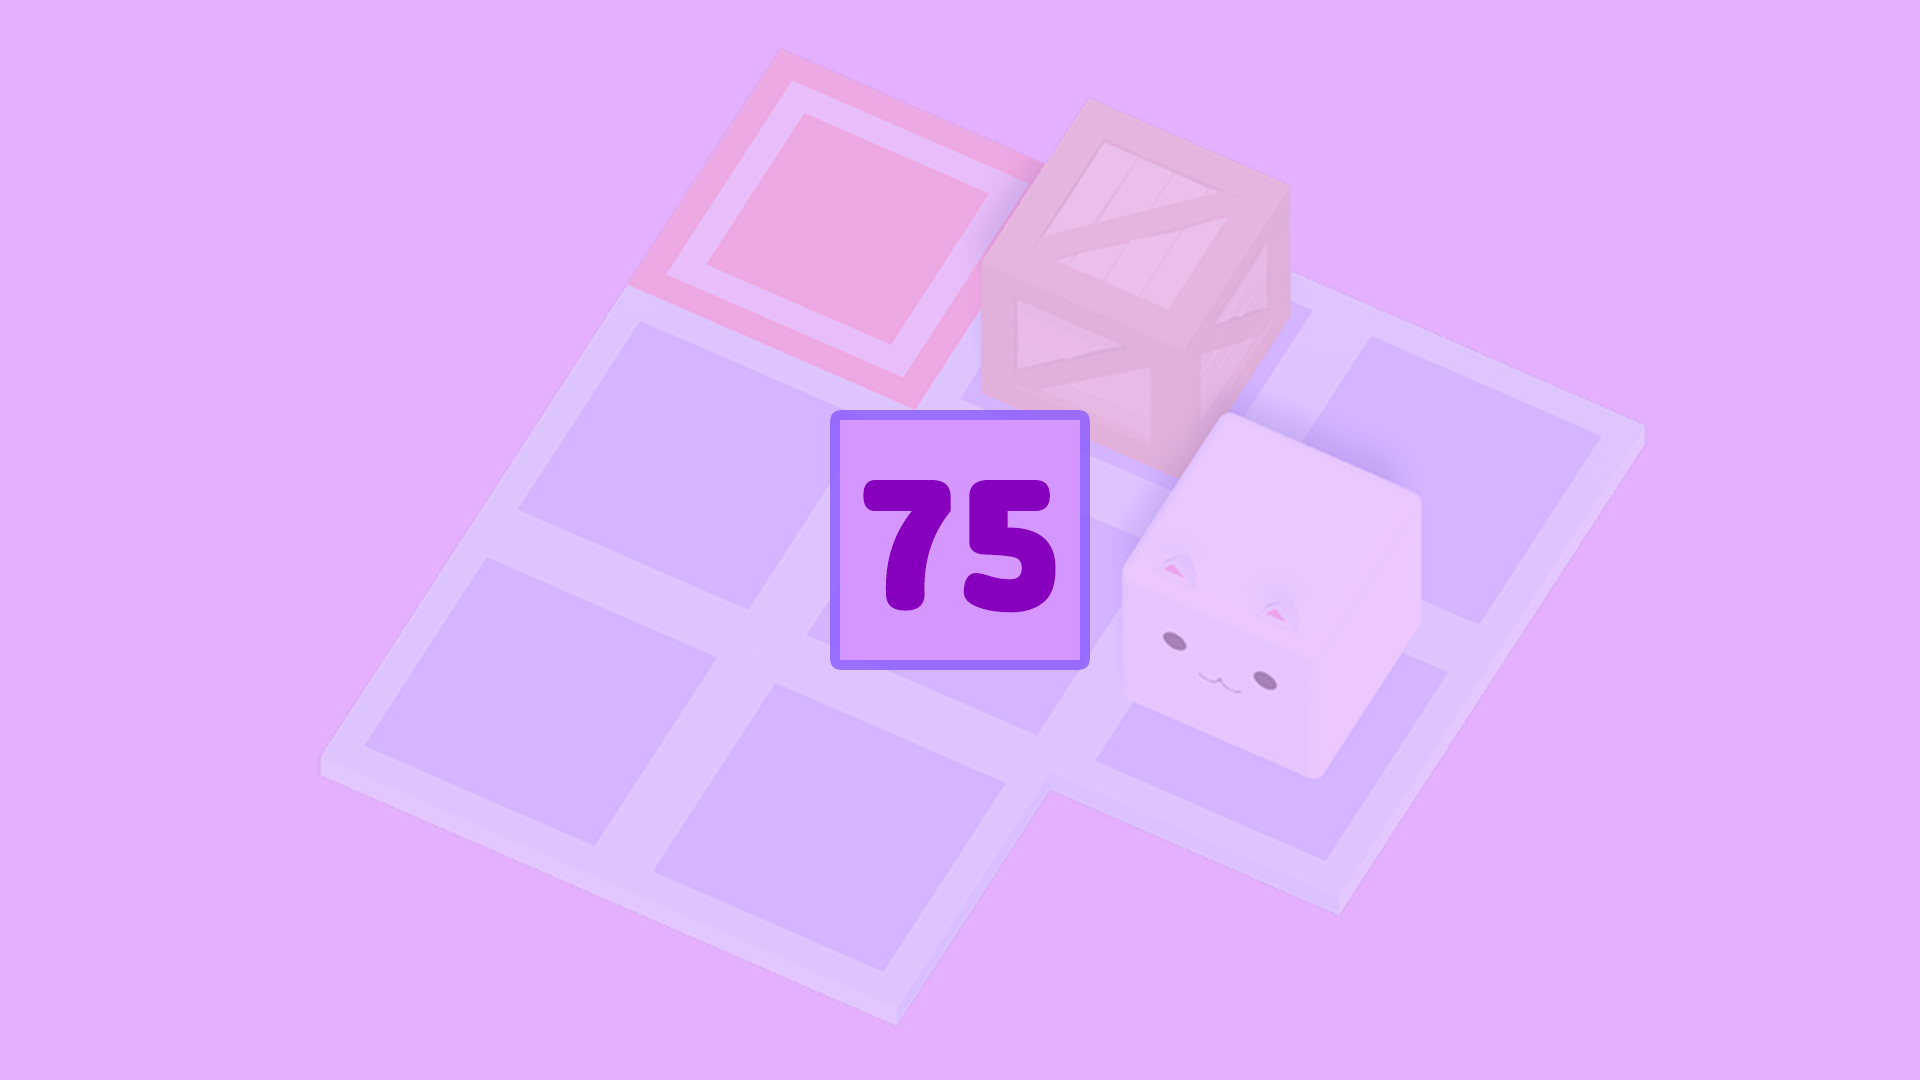 Icon for Level 75